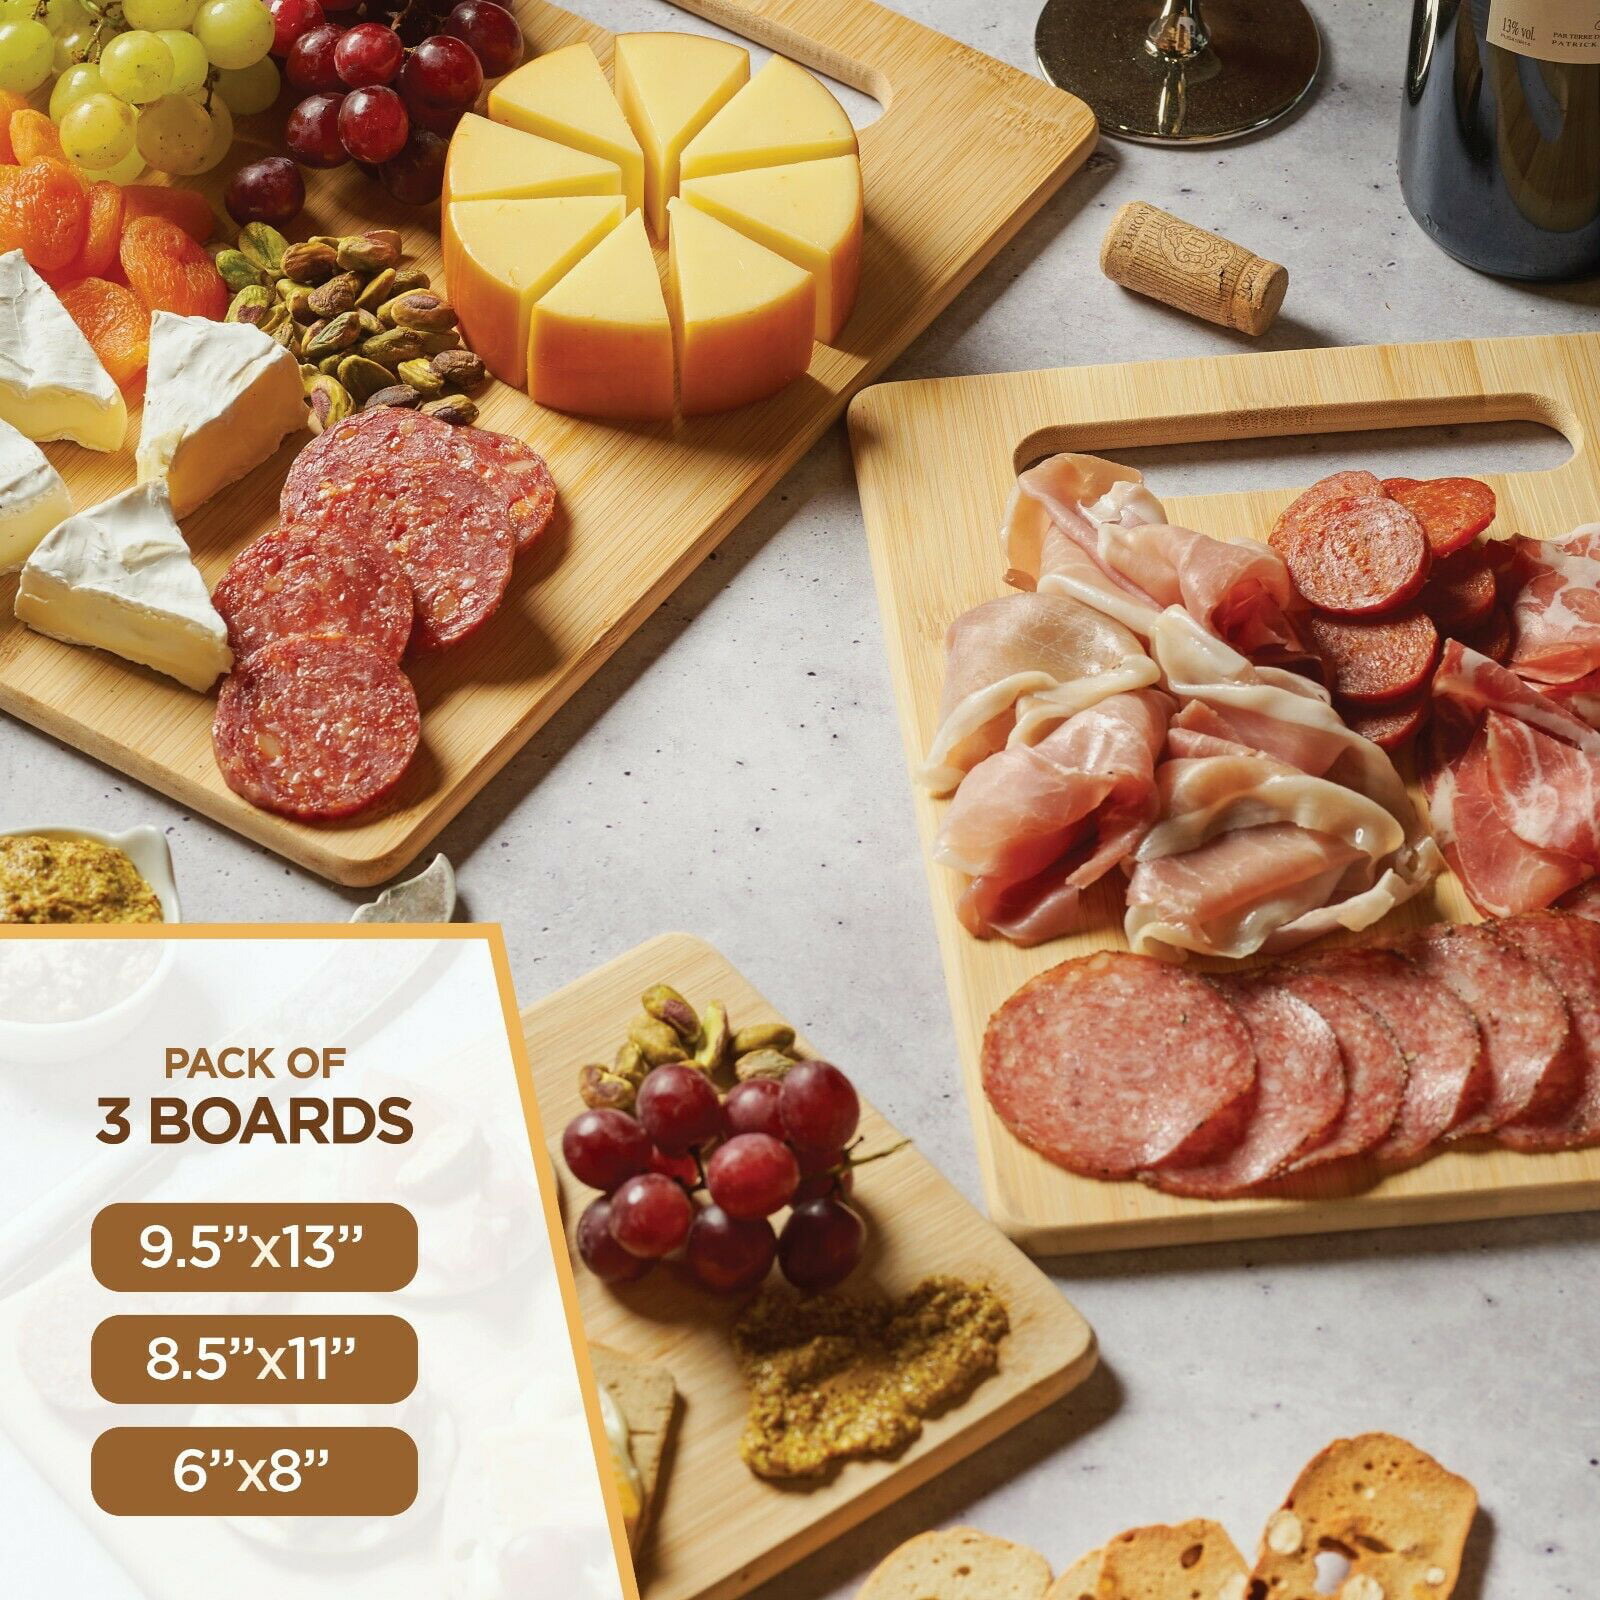 These Durable Cutting Boards Have Over 19,300 Five-Star Ratings, and a  3-Piece Set Is 45% Off